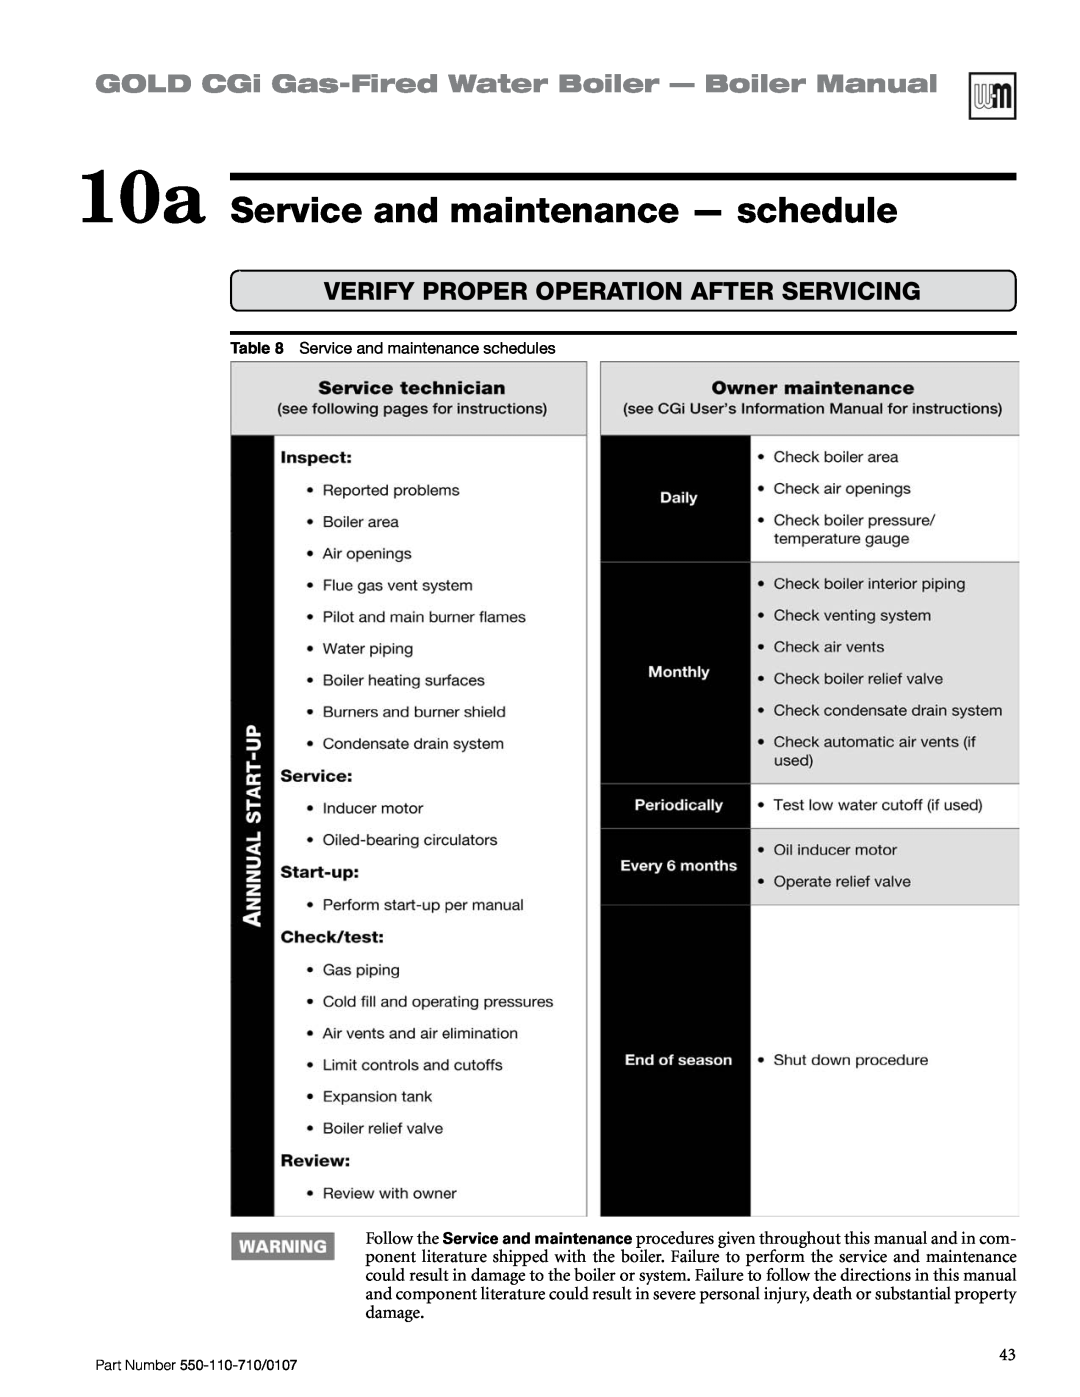 Weil-McLain Series 2 manual 10a Service and maintenance — schedule, GOLD CGi Gas-FiredWater Boiler — Boiler Manual 